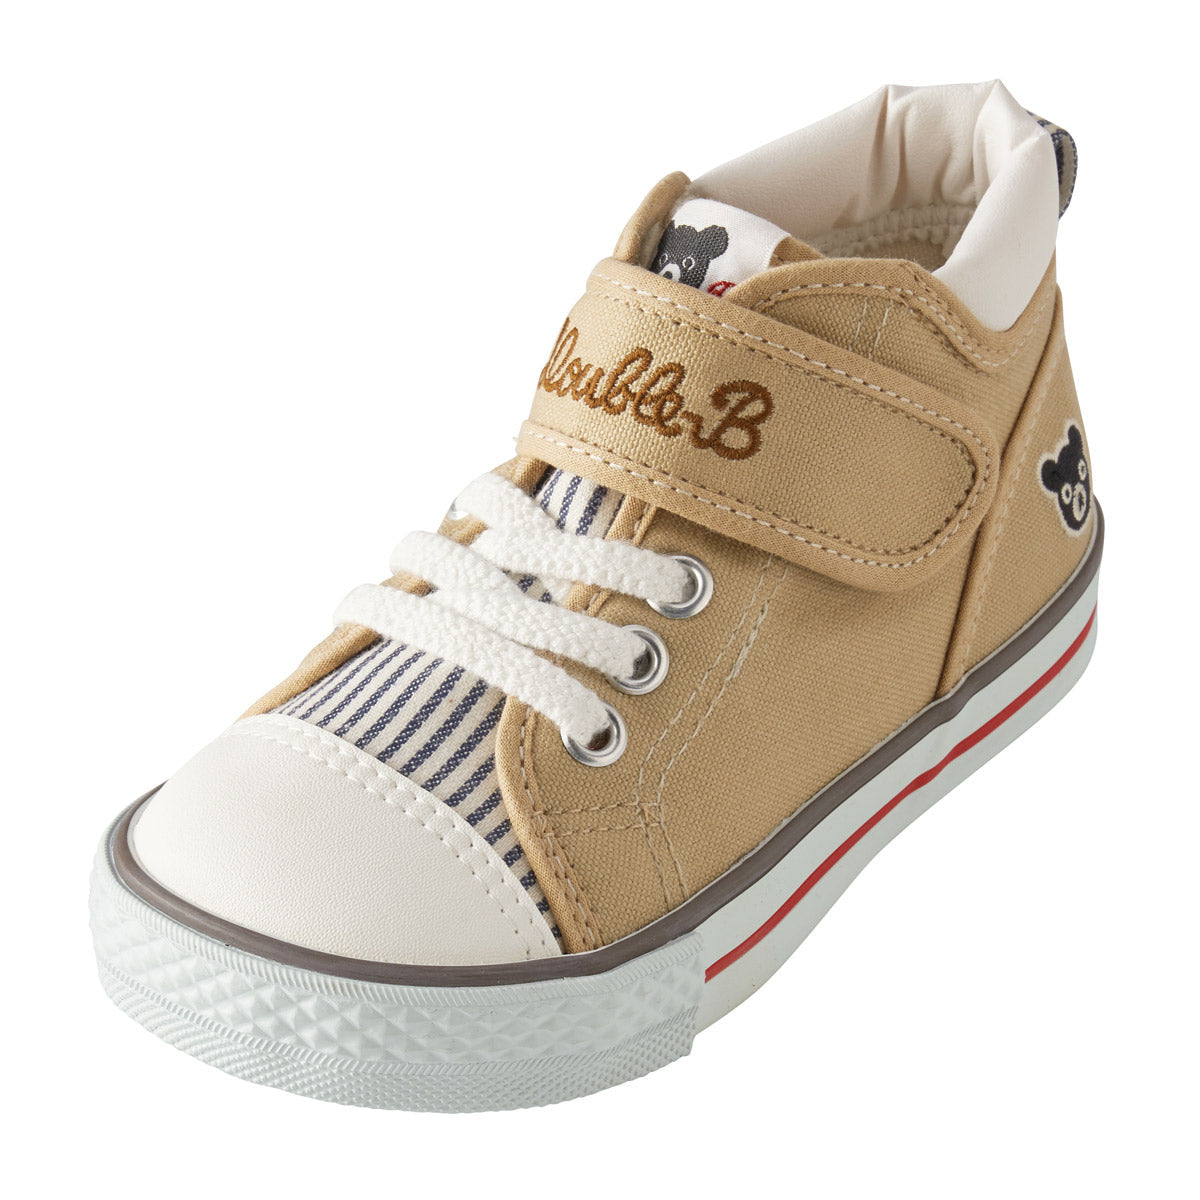 met tijd Piket lippen DOUBLE_B High Top sneaker for Kids - Camel Brown – MIKI HOUSE Outlet  Official